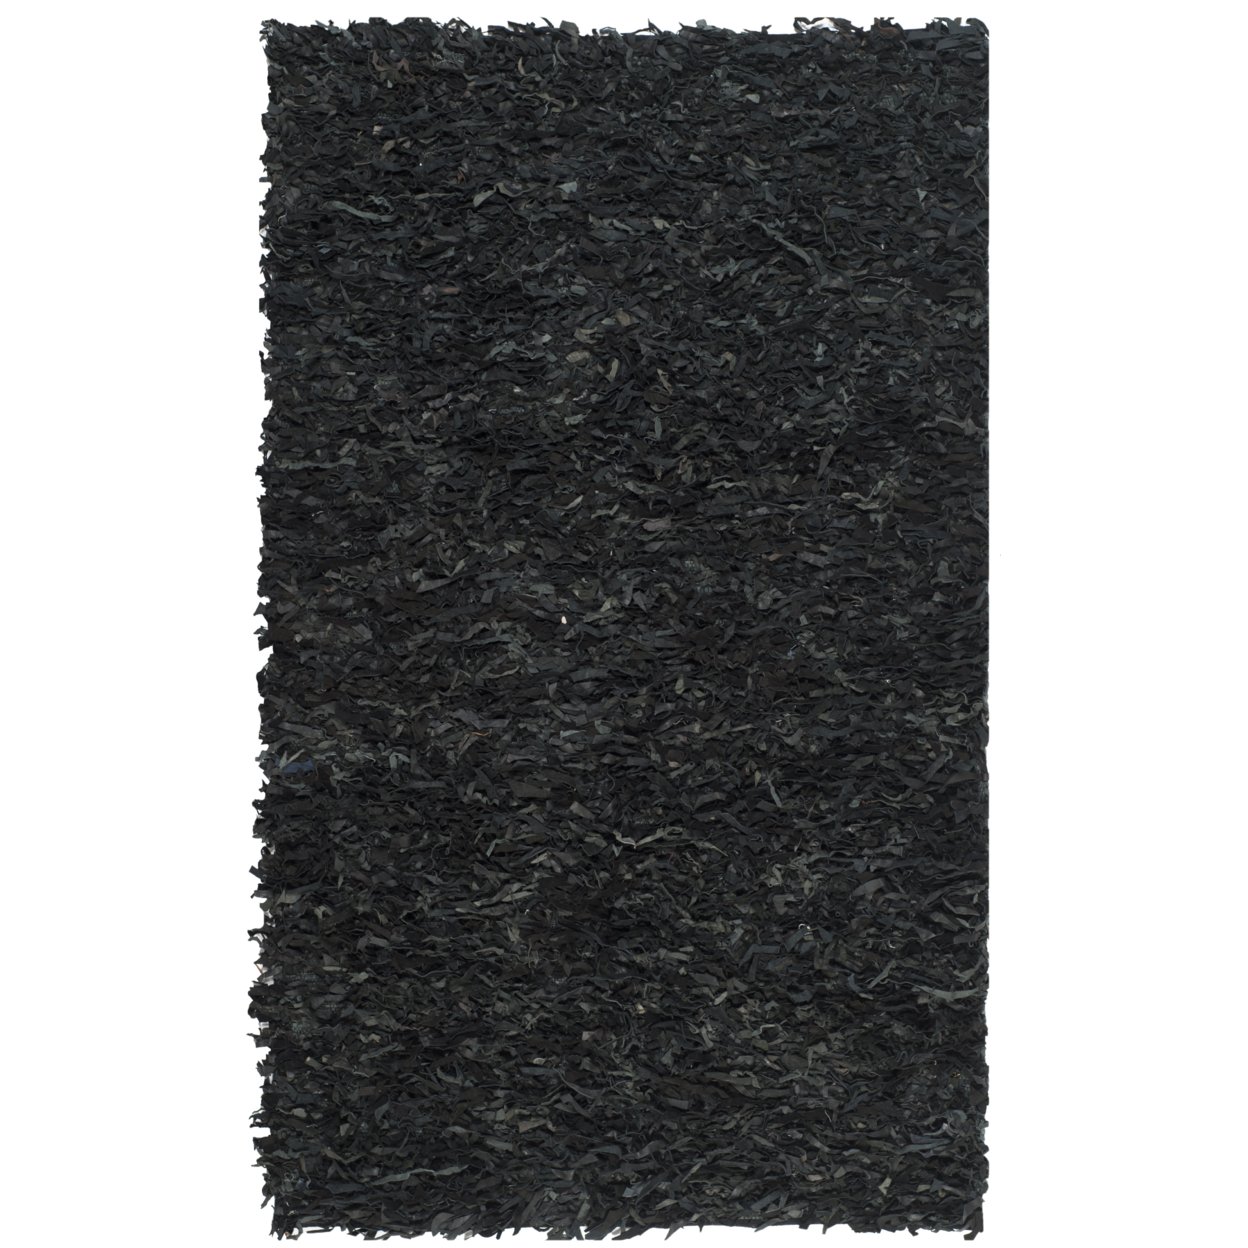 SAFAVIEH Leather Shag LSG511A Hand-knotted Black Rug - 5' X 8'